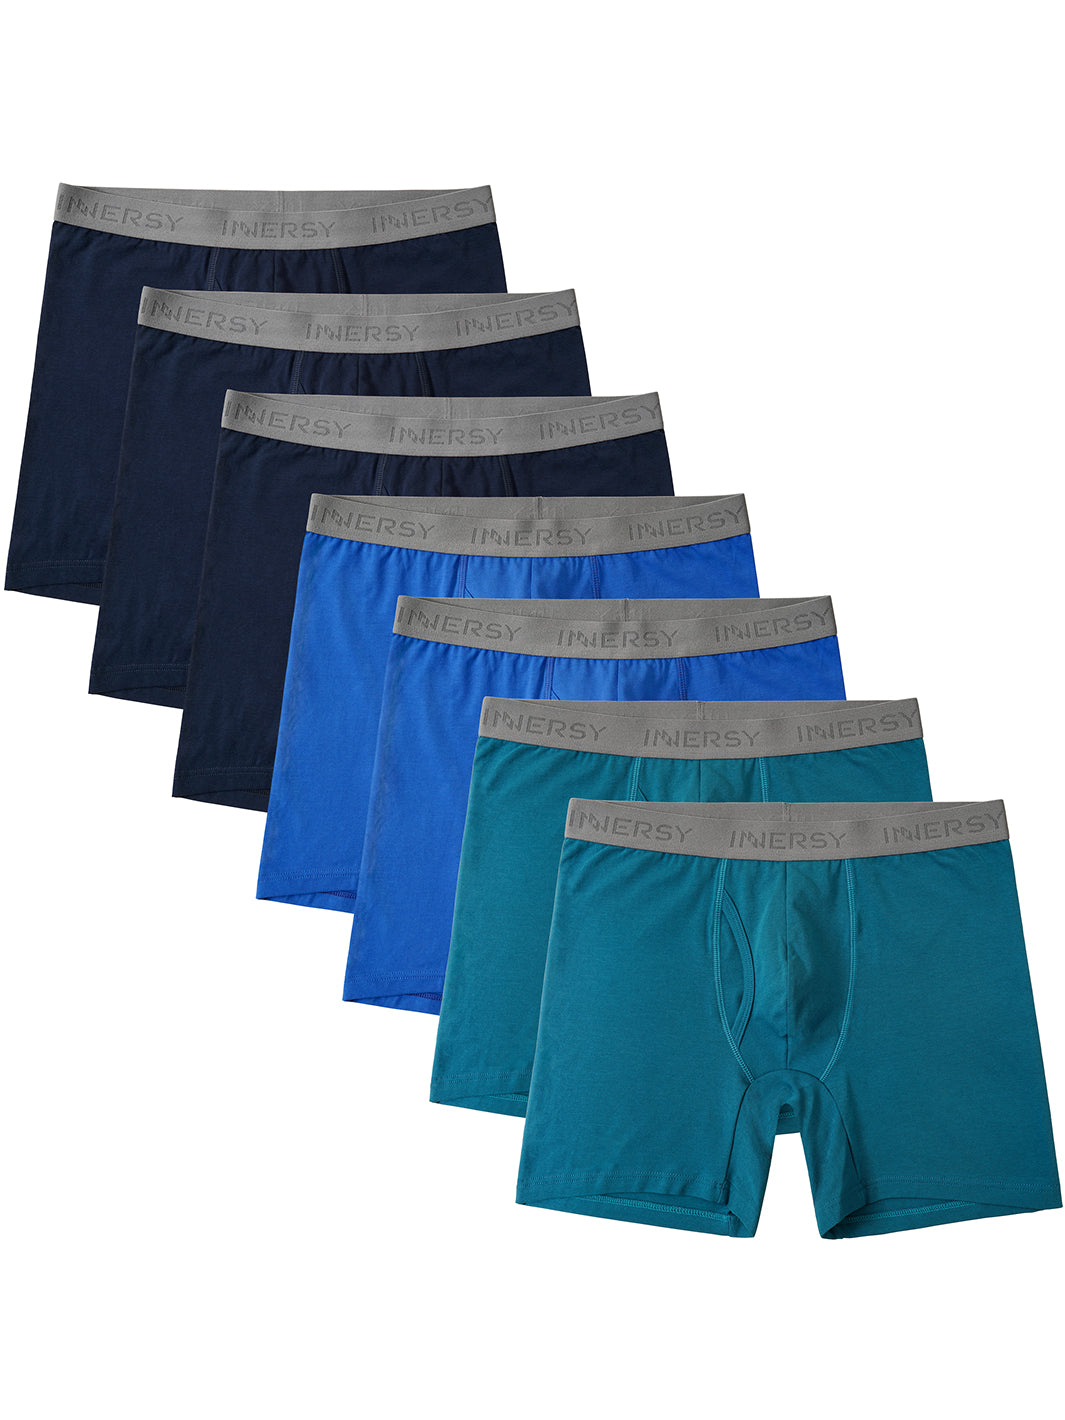 INNERSY Men's Mesh Boxer Briefs Cooling Breathable Sports Underwear W/Fly  4-Pack (L, Black/Lake Blue/Charcoal Gray/Cream Gray) 